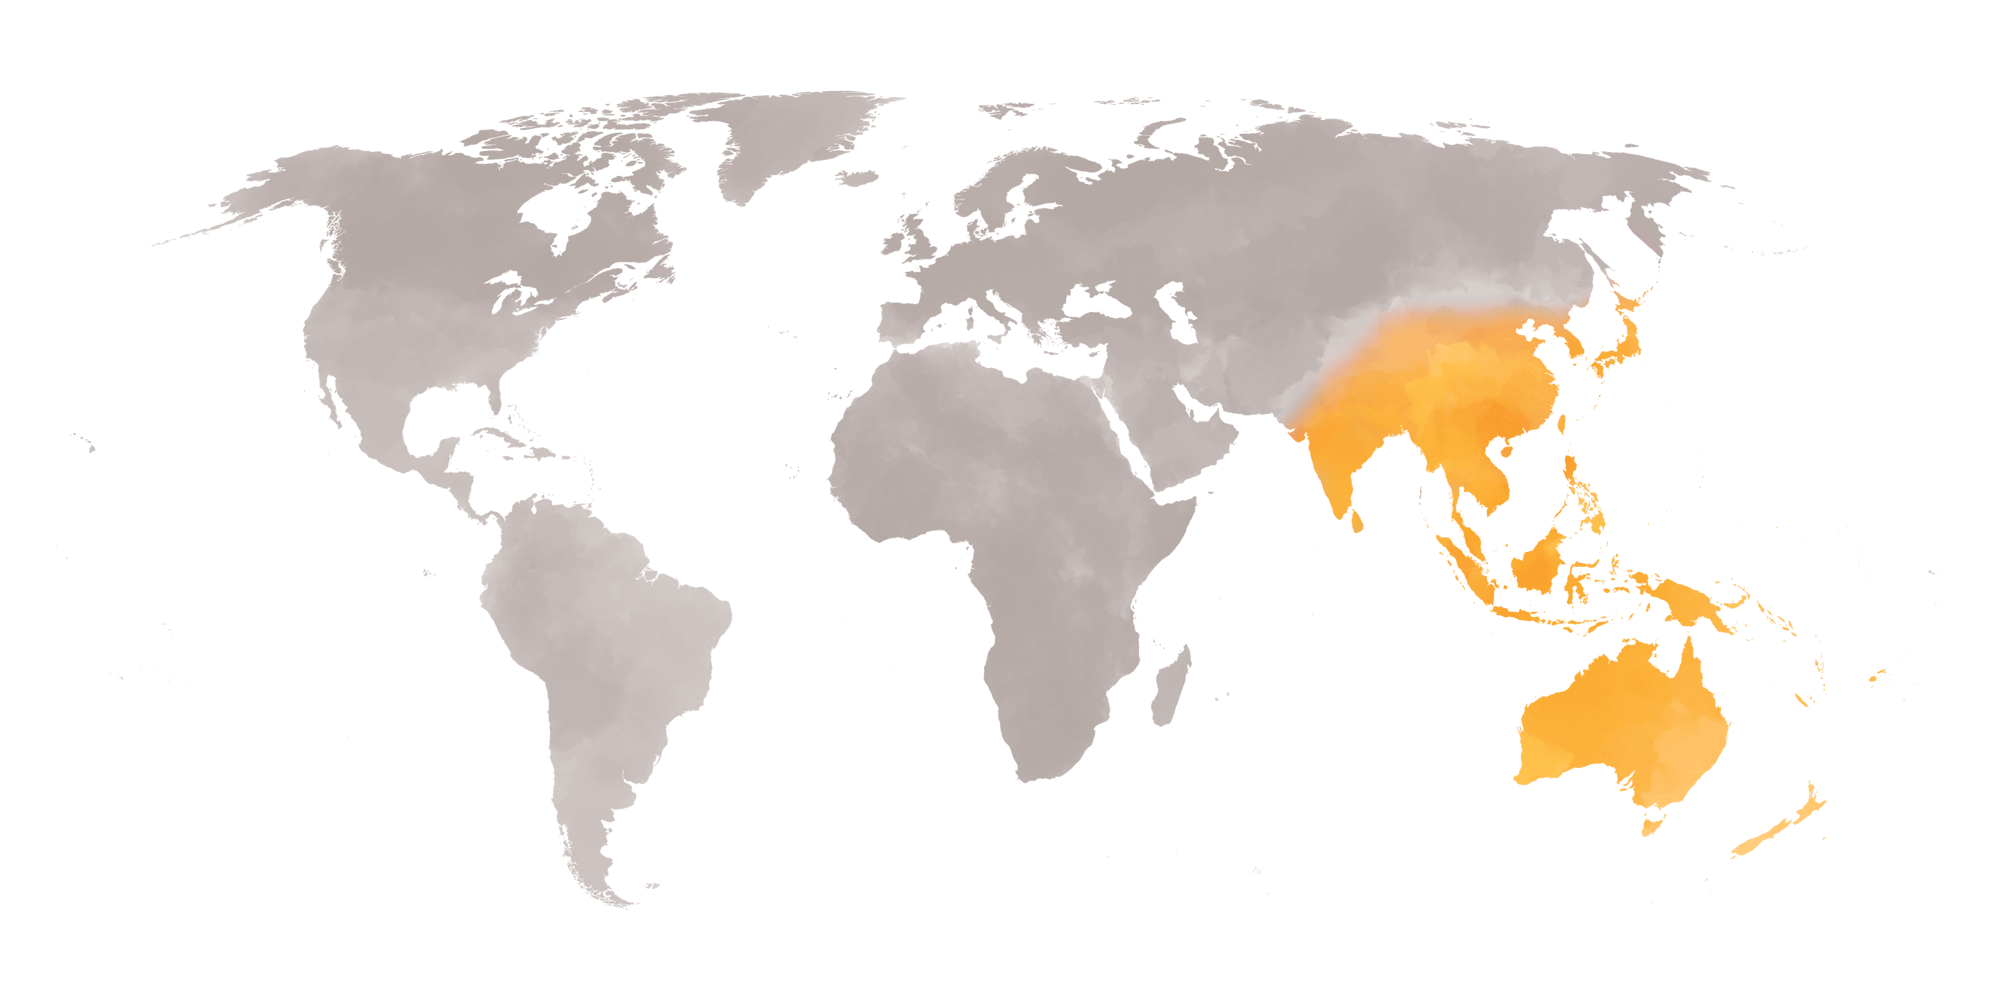 Asian Spice Map